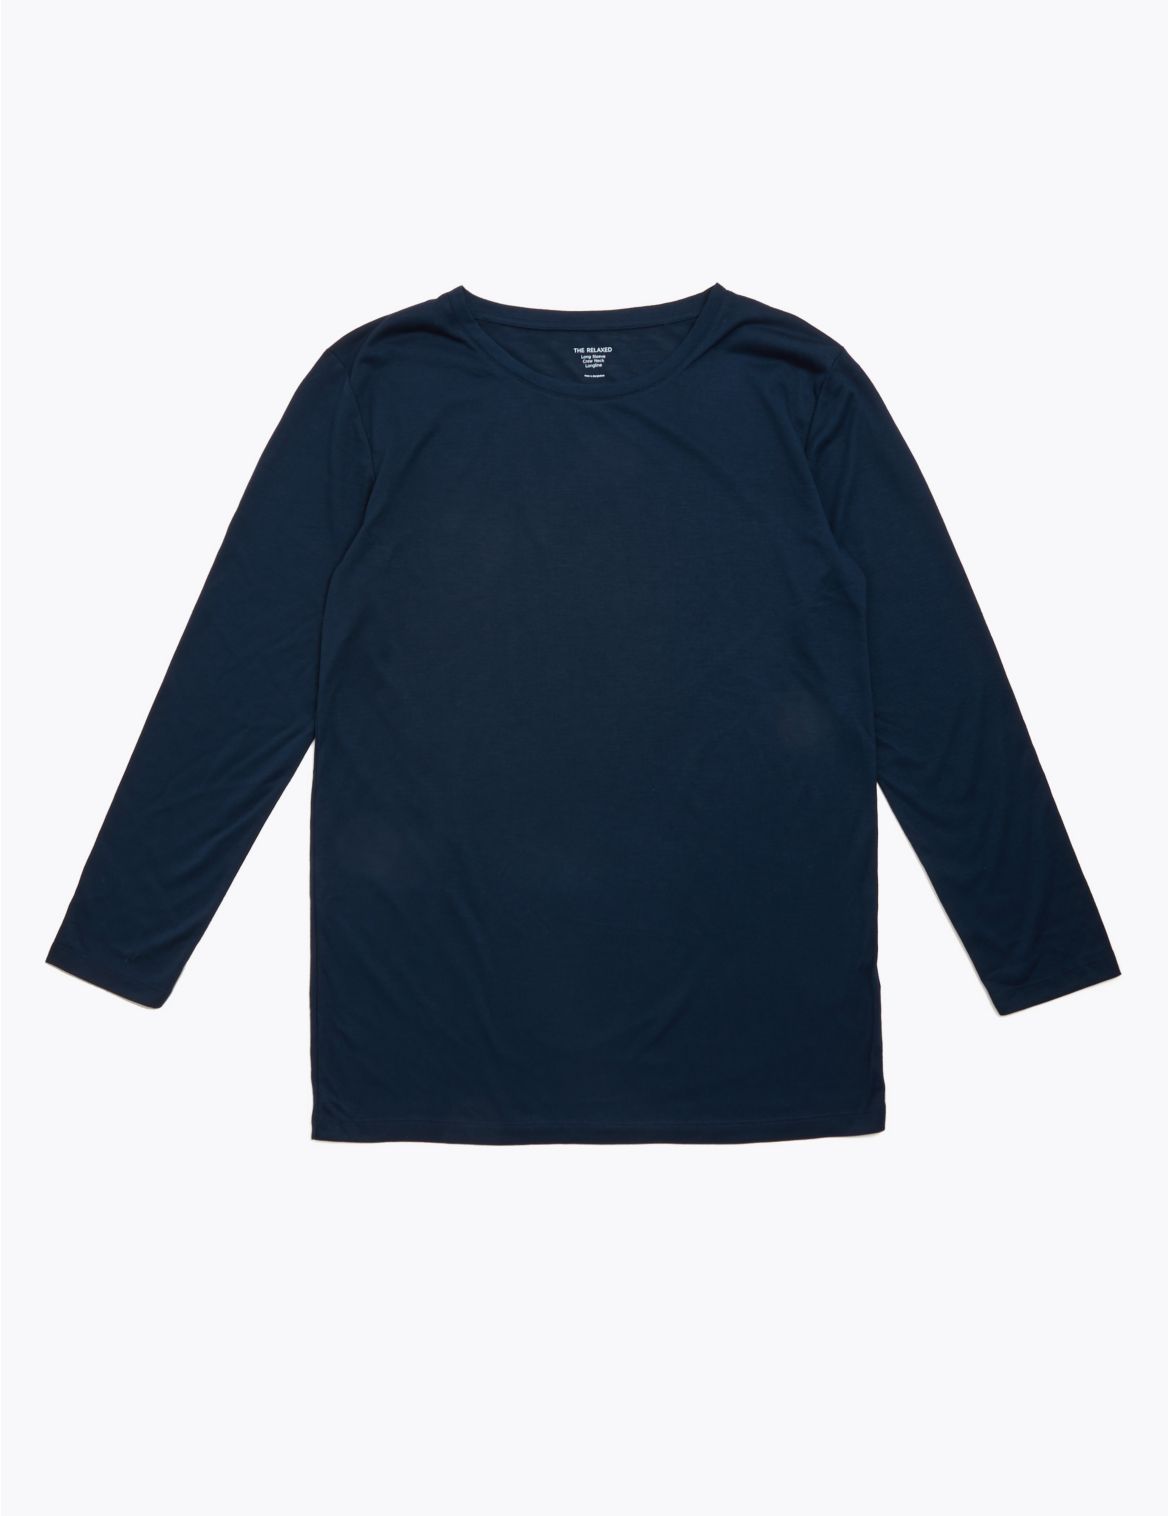 Crew Neck Relaxed Longline Long Sleeve Top navy